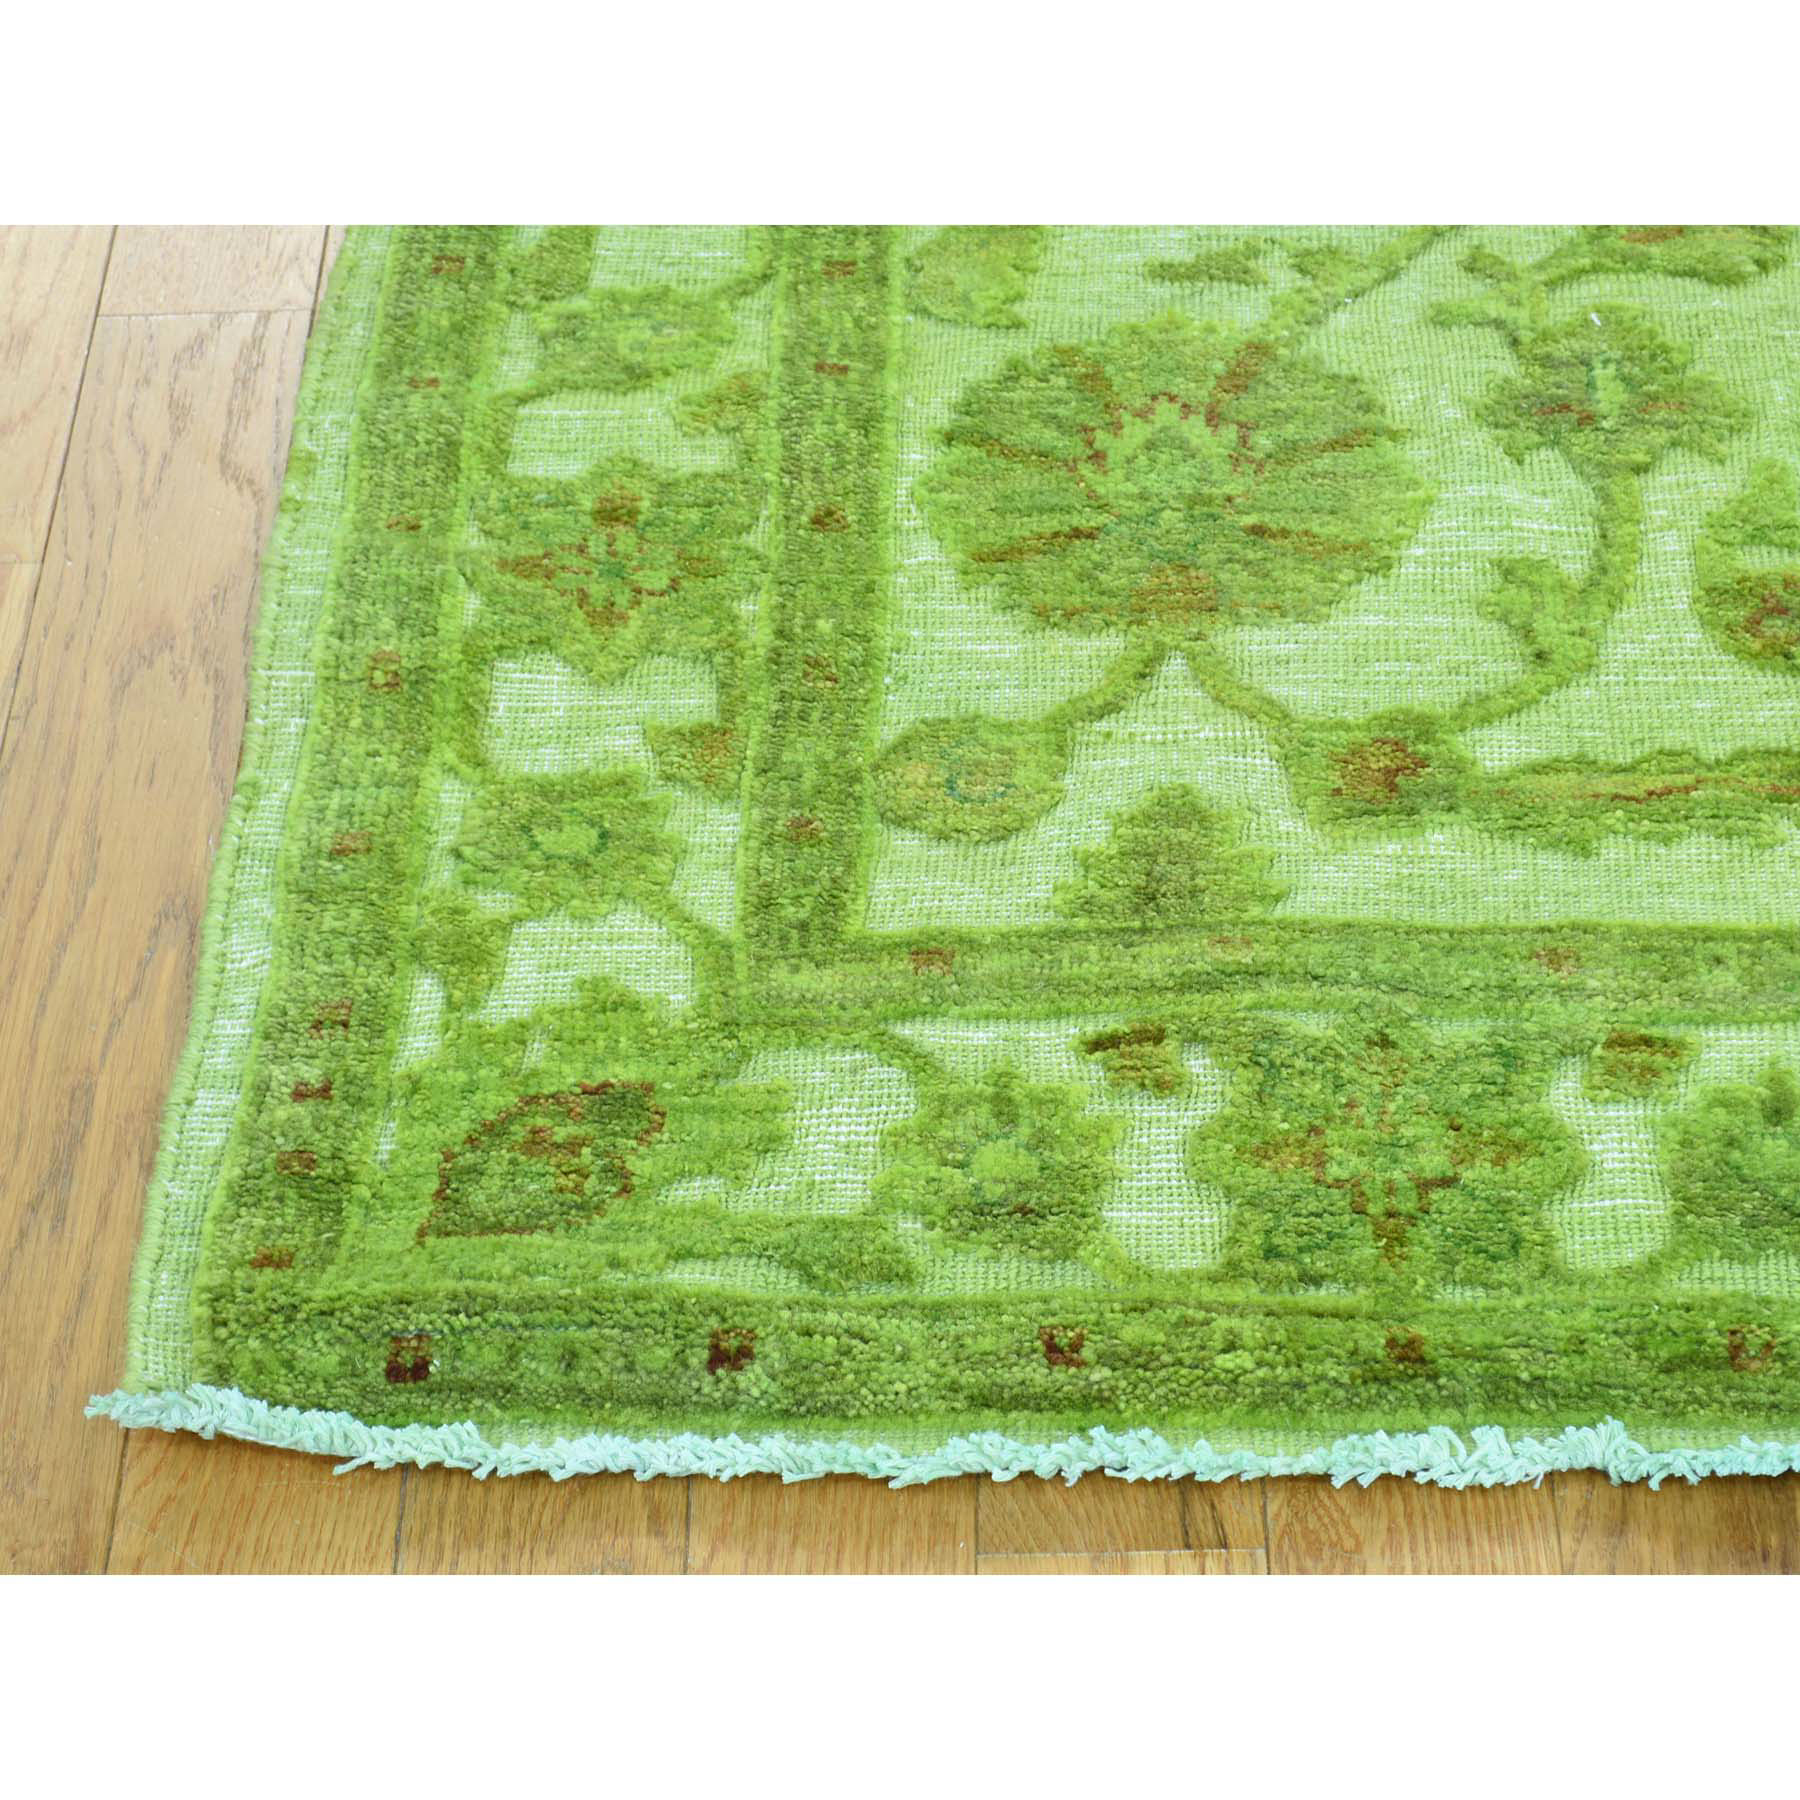 4-2 x6-2  Hand-Knotted Overdyed Hi and Low Pile Pure Wool Oriental Rug 